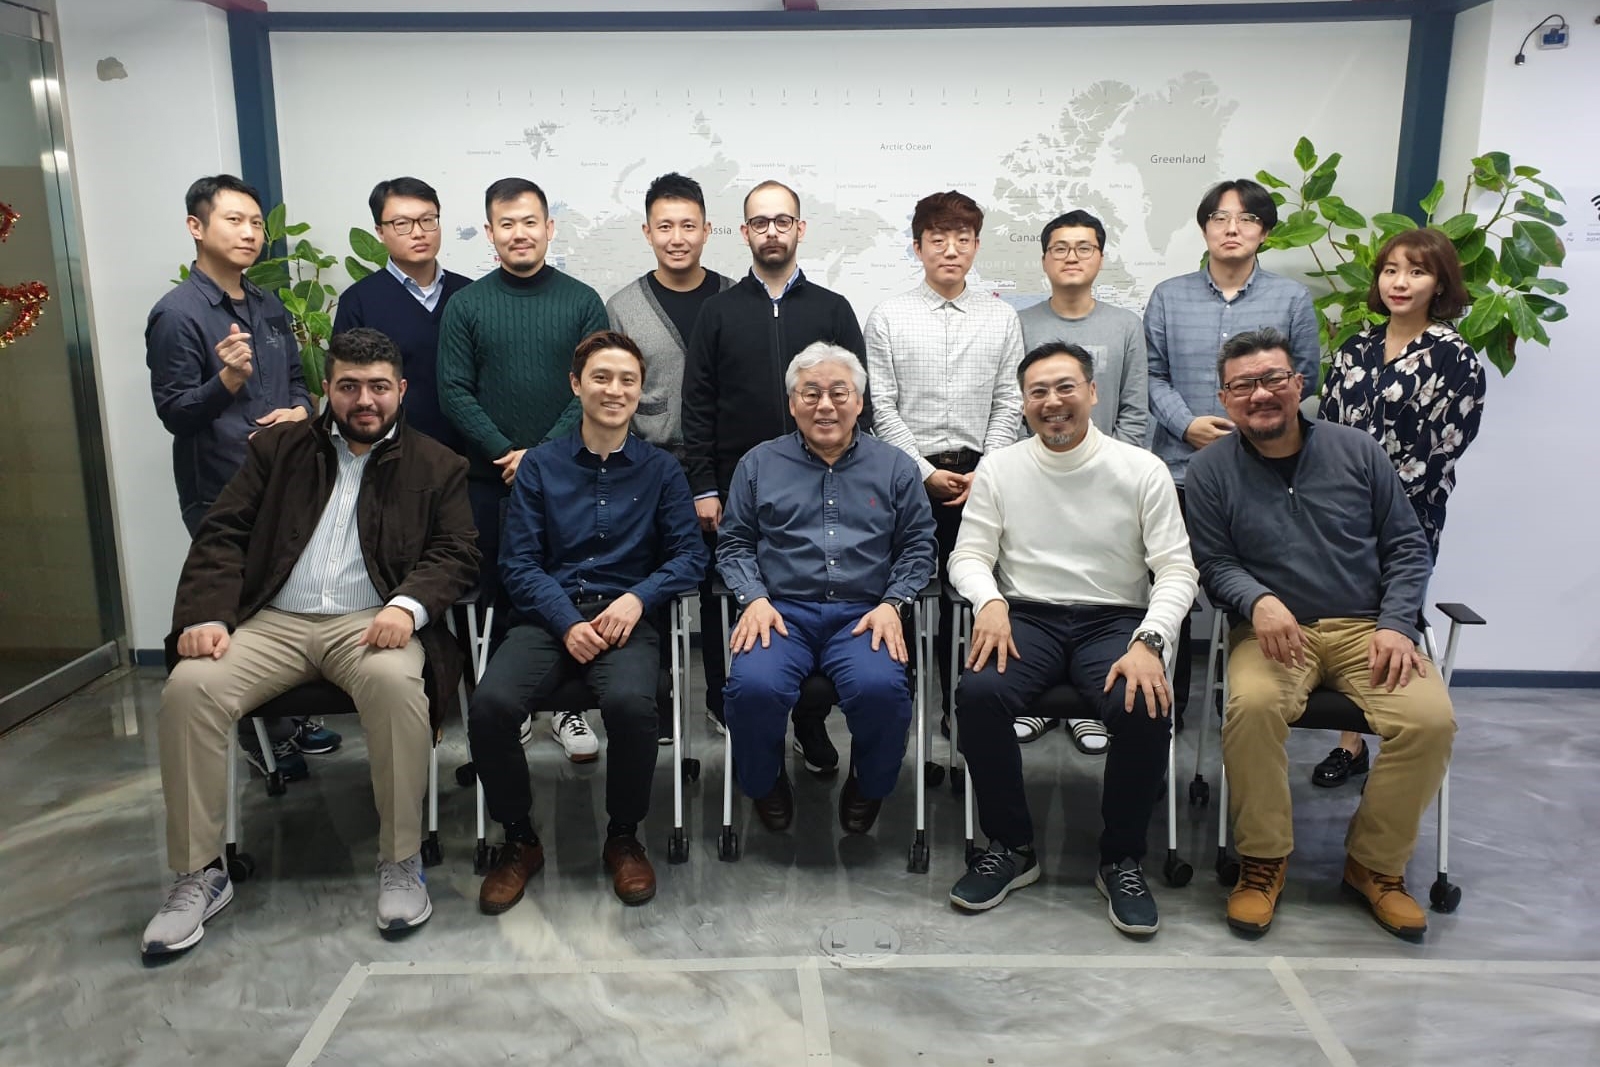 Photo: Collaboration helps technology companies to take their businesses to the next level. Seoul-based Xandar Kardian team led by Professor James Choi. Source: Cherrypicks